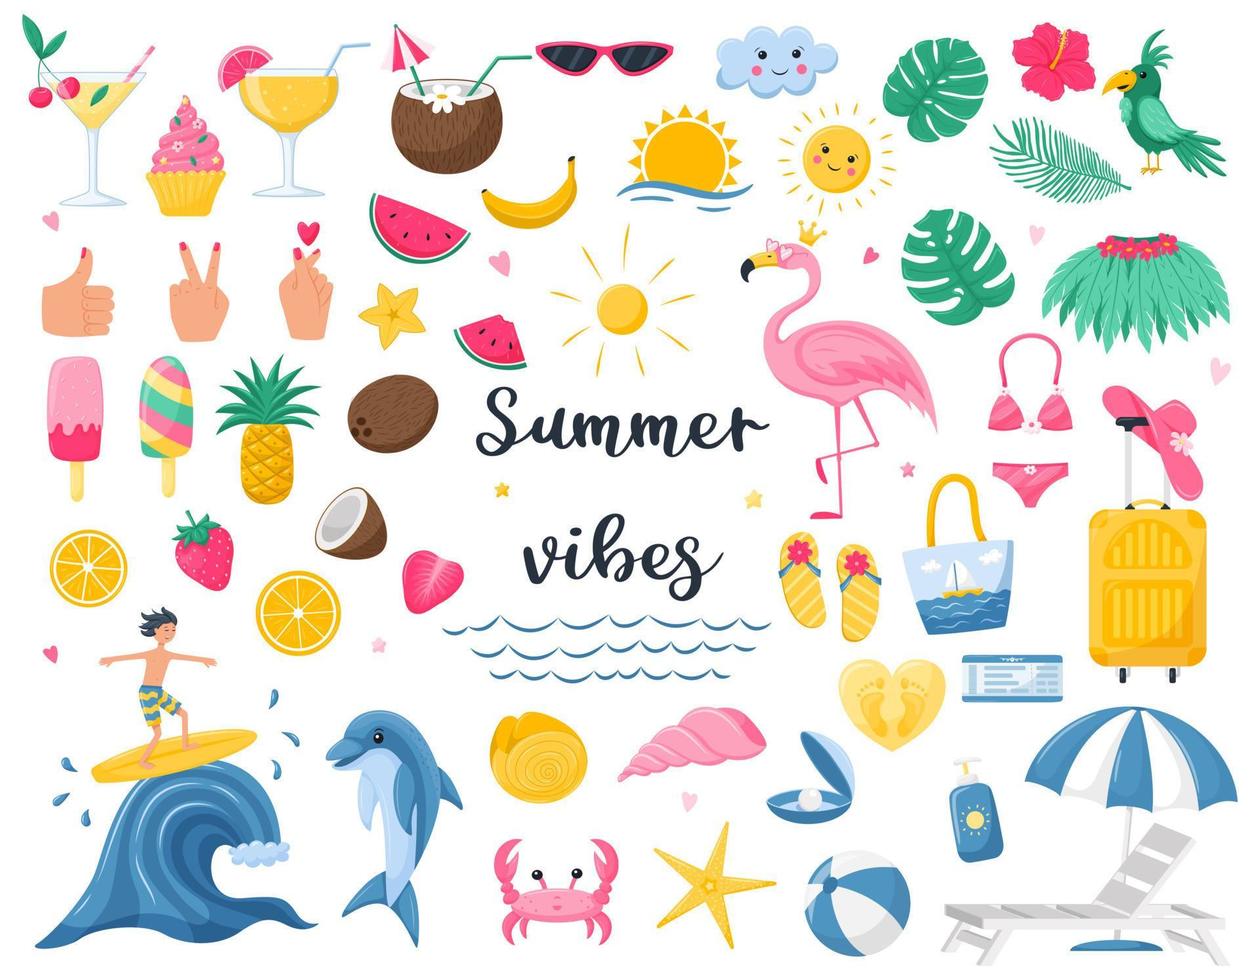 A set of bright summer decorative elements. Fruit, beach accessories, flamingo, surfer, fruit. Cute vector illustrations in Flat cartoon style isolated on white background.